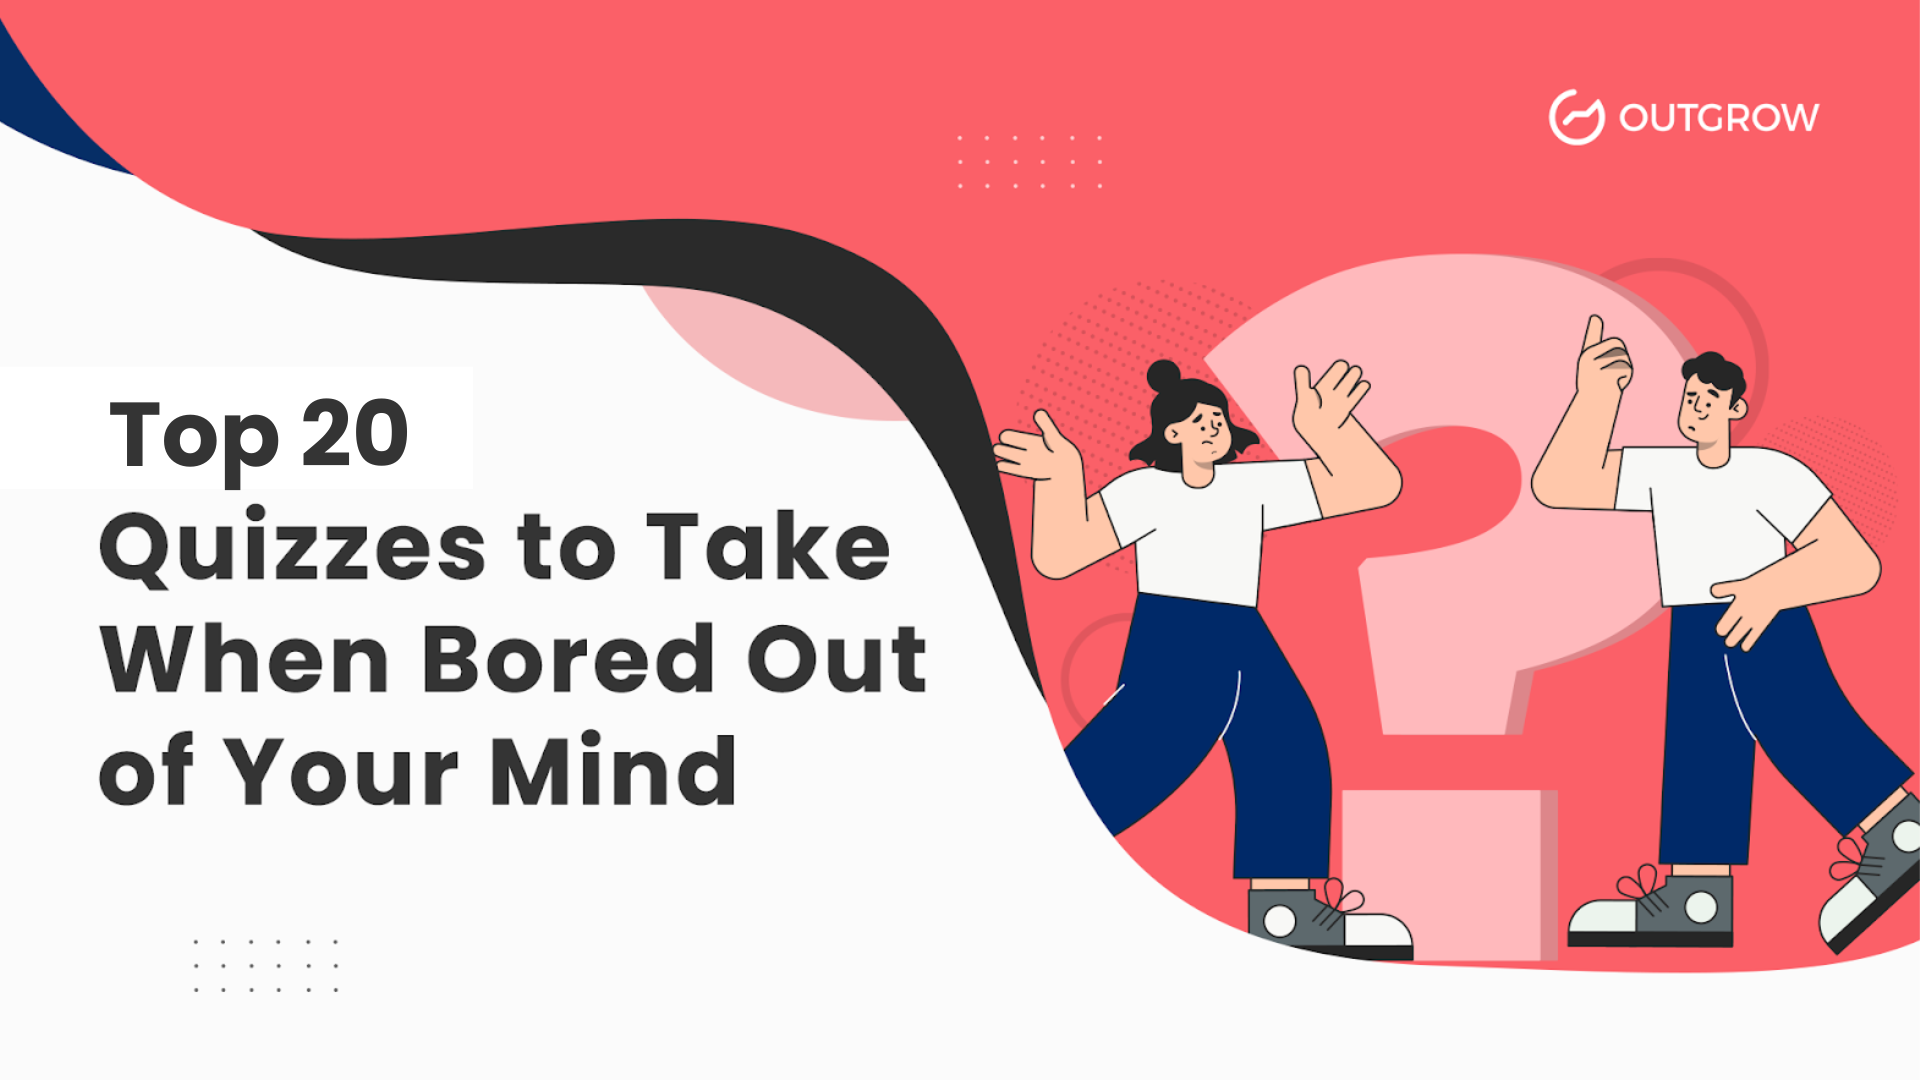 Top 20 Quizzes To Take When Bored